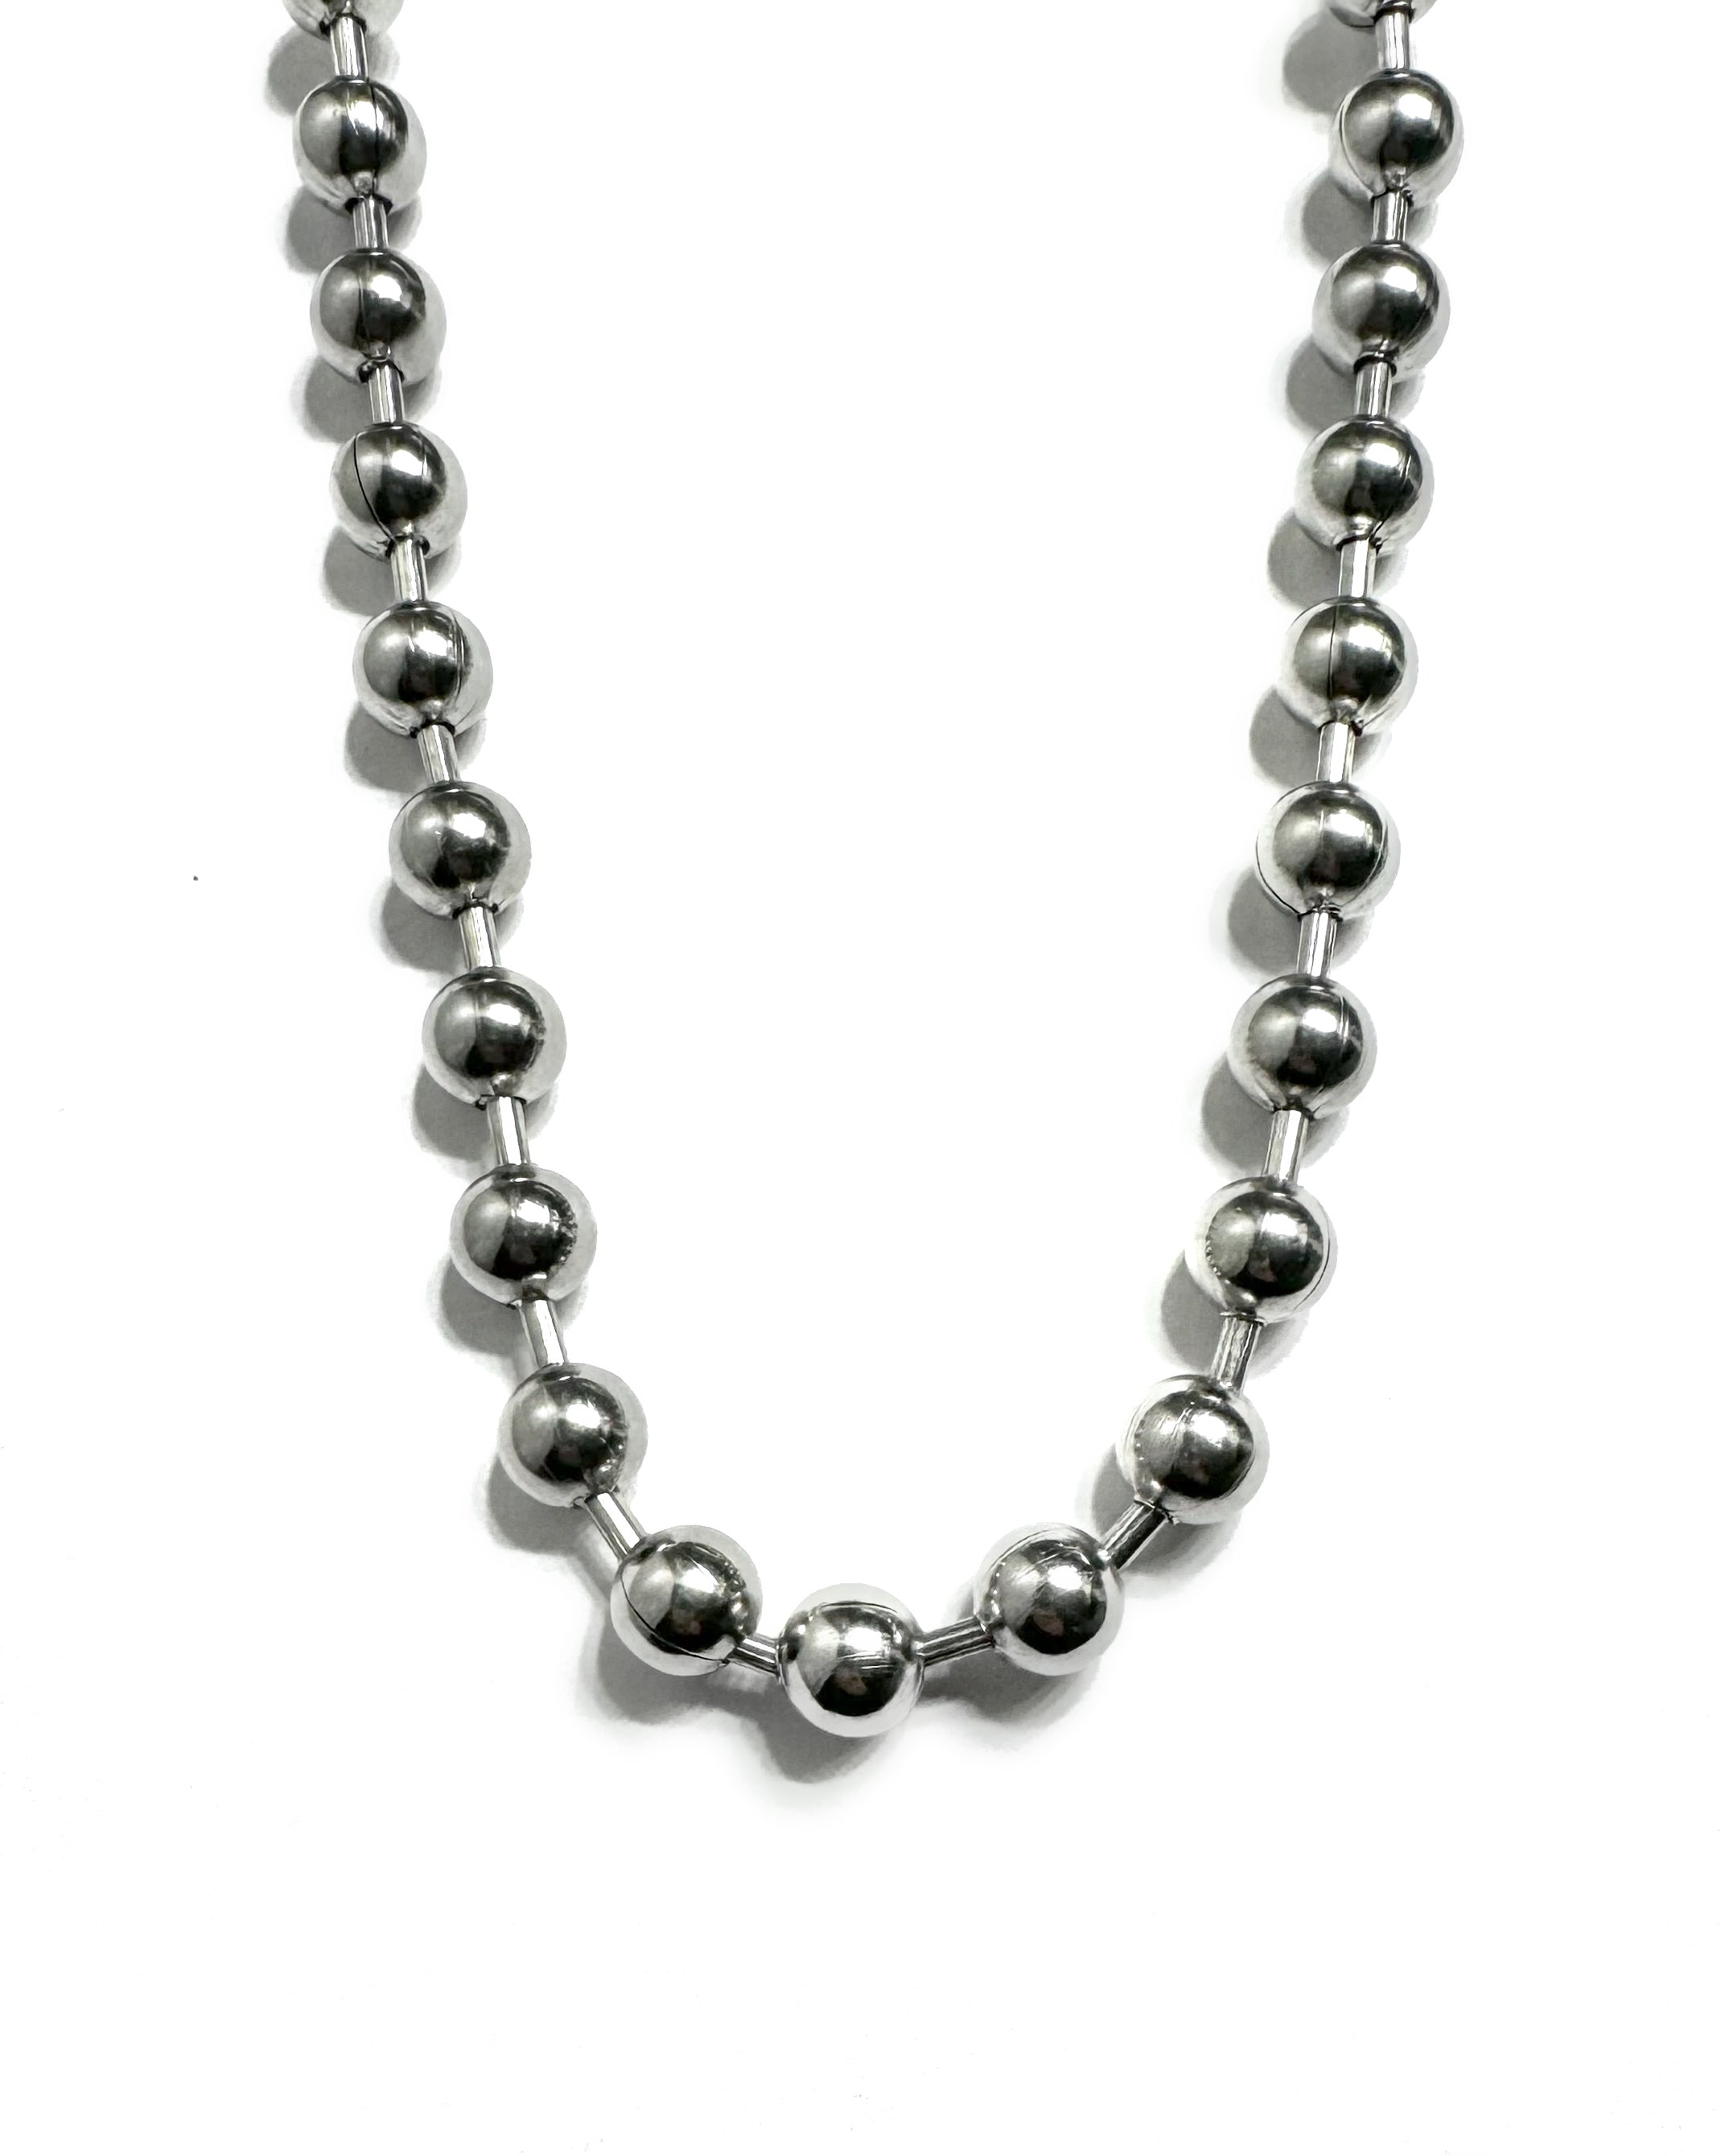 High Quality Stainless Steel Ball Chain Necklace 24